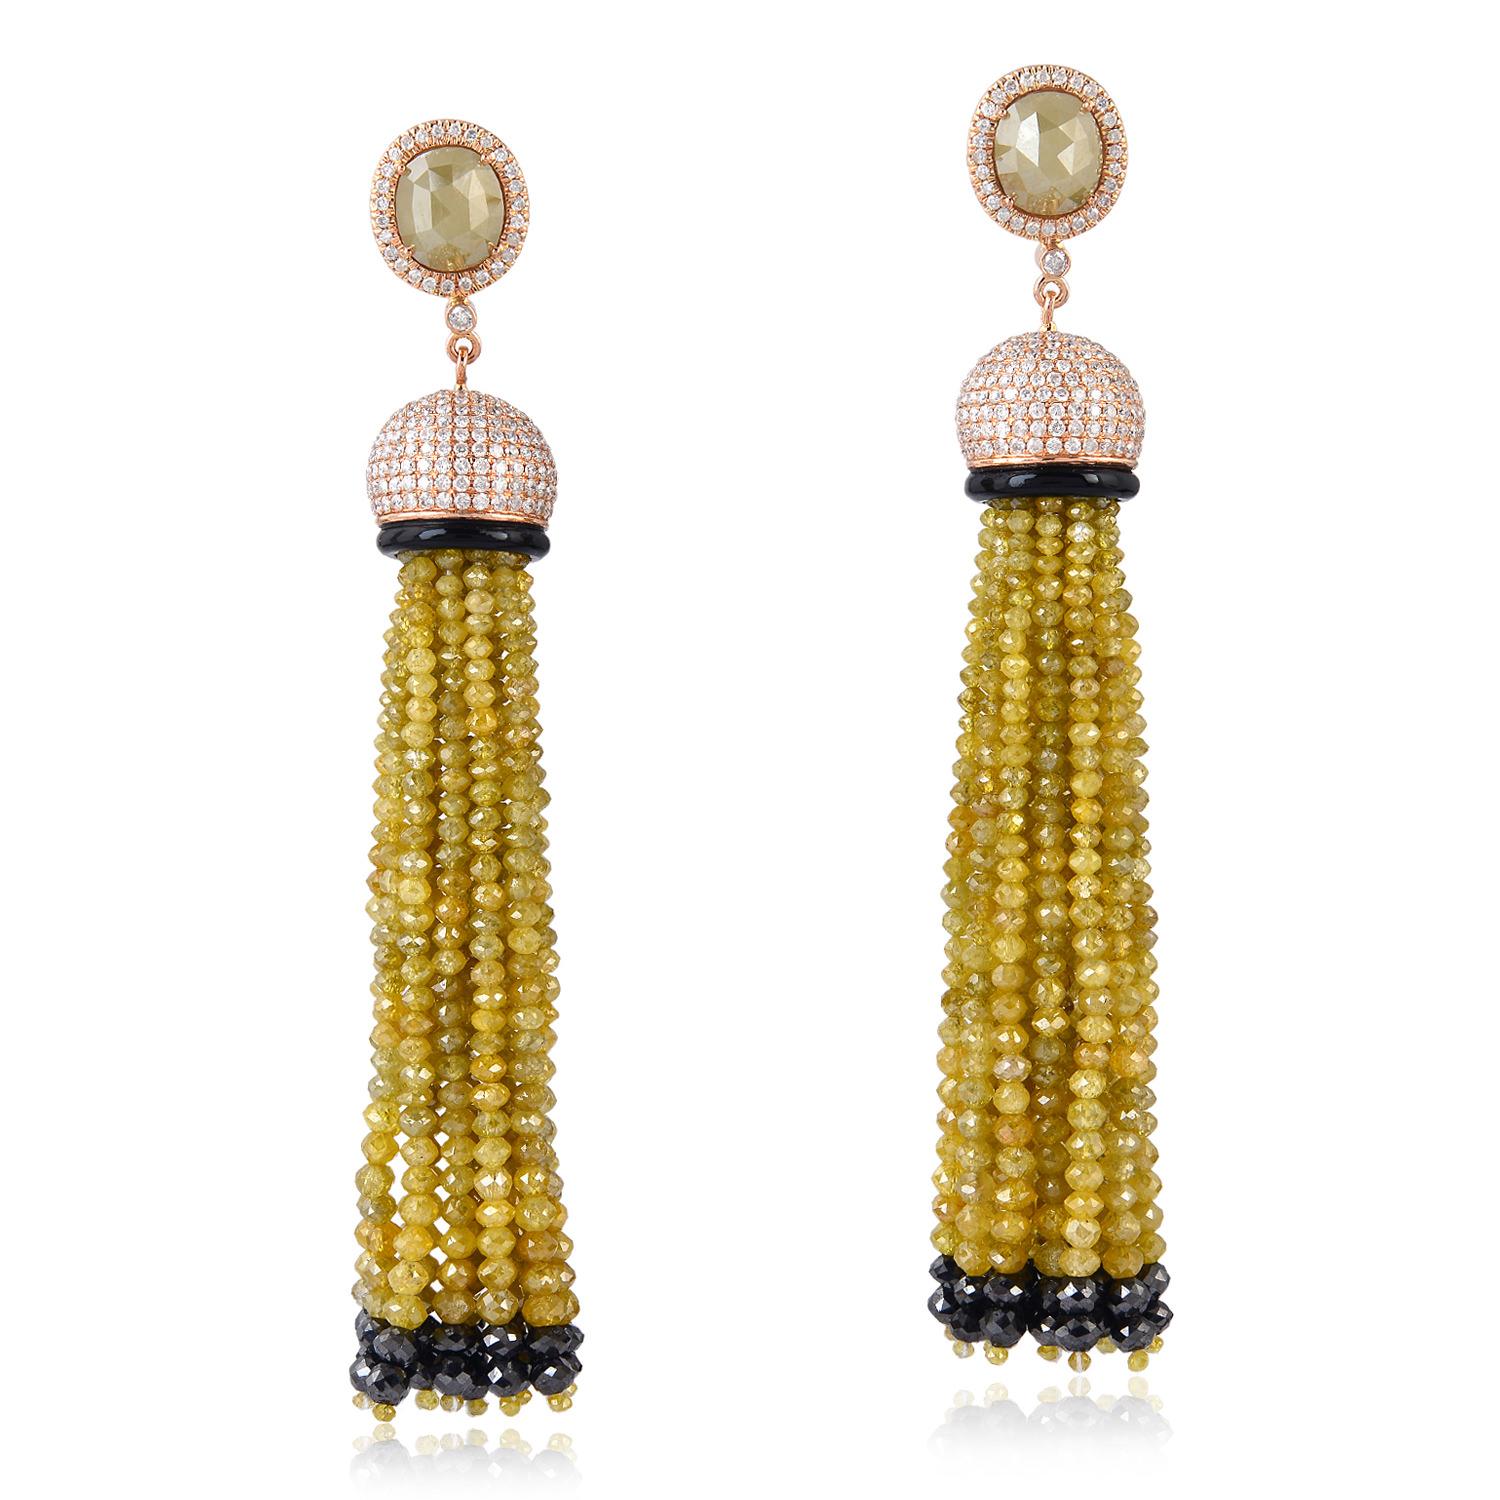 Yellow Diamond Tassel Earrings With White Diamond Pave Cap Made In 18k Rose Gold In New Condition For Sale In New York, NY